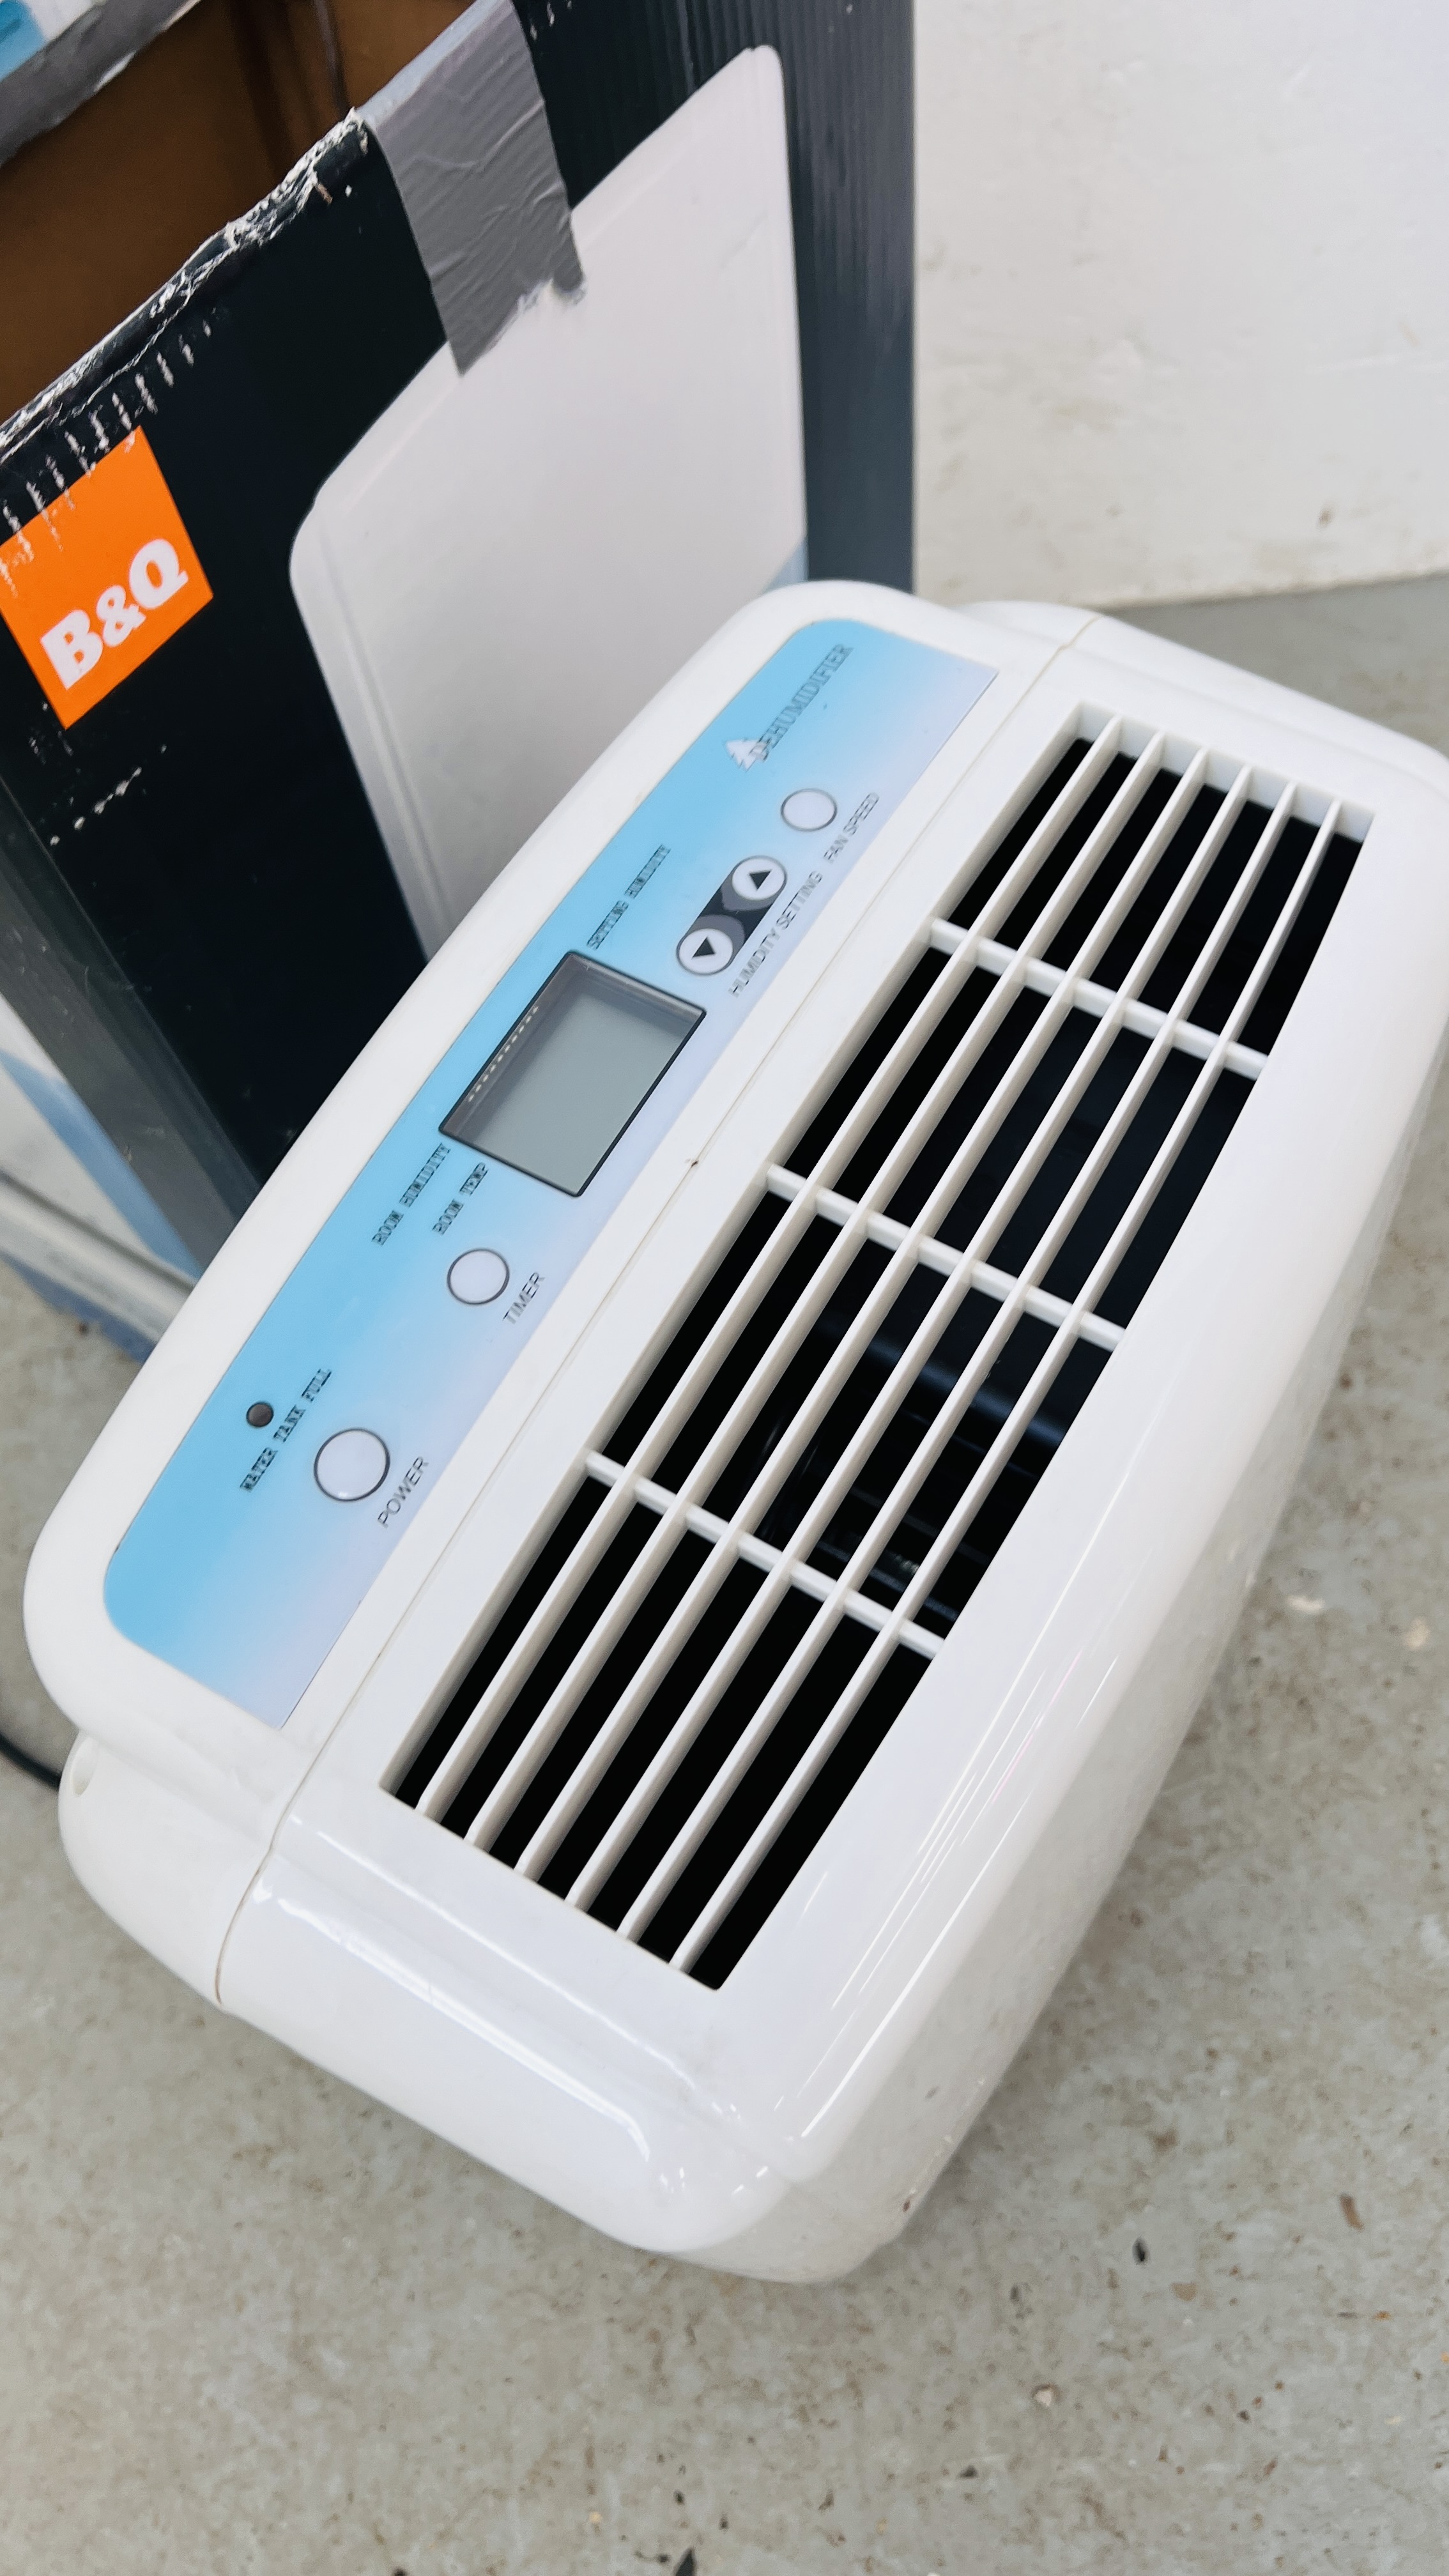 A 16L DEHUMIDIFIER ALONG WITH ORIGINAL BOX - SOLD AS SEEN. - Image 3 of 5